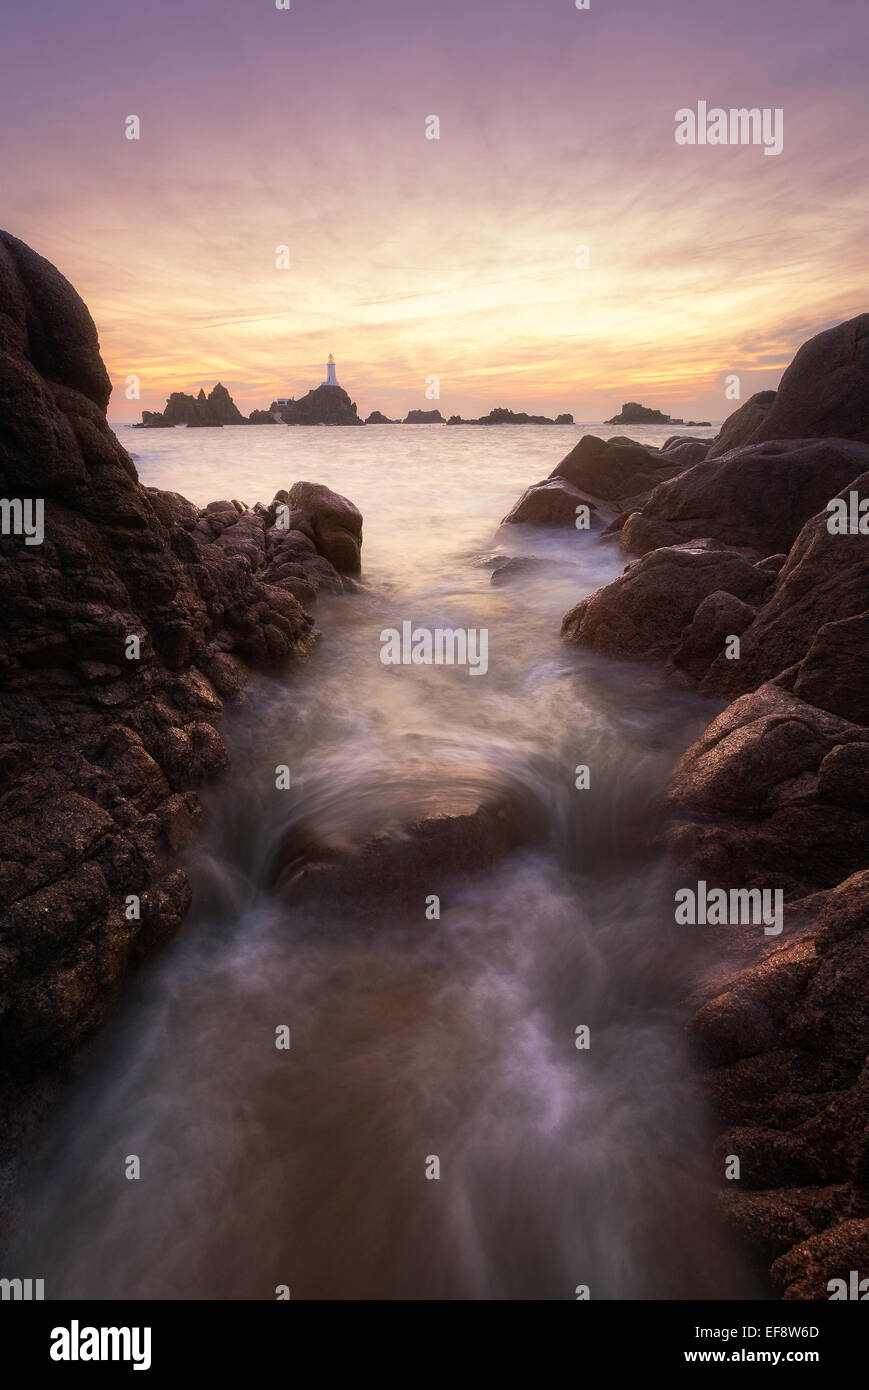 Jersey, La Corbiere, Seawater flowing in-between rocks with lighthouse seen at horizon Stock Photo